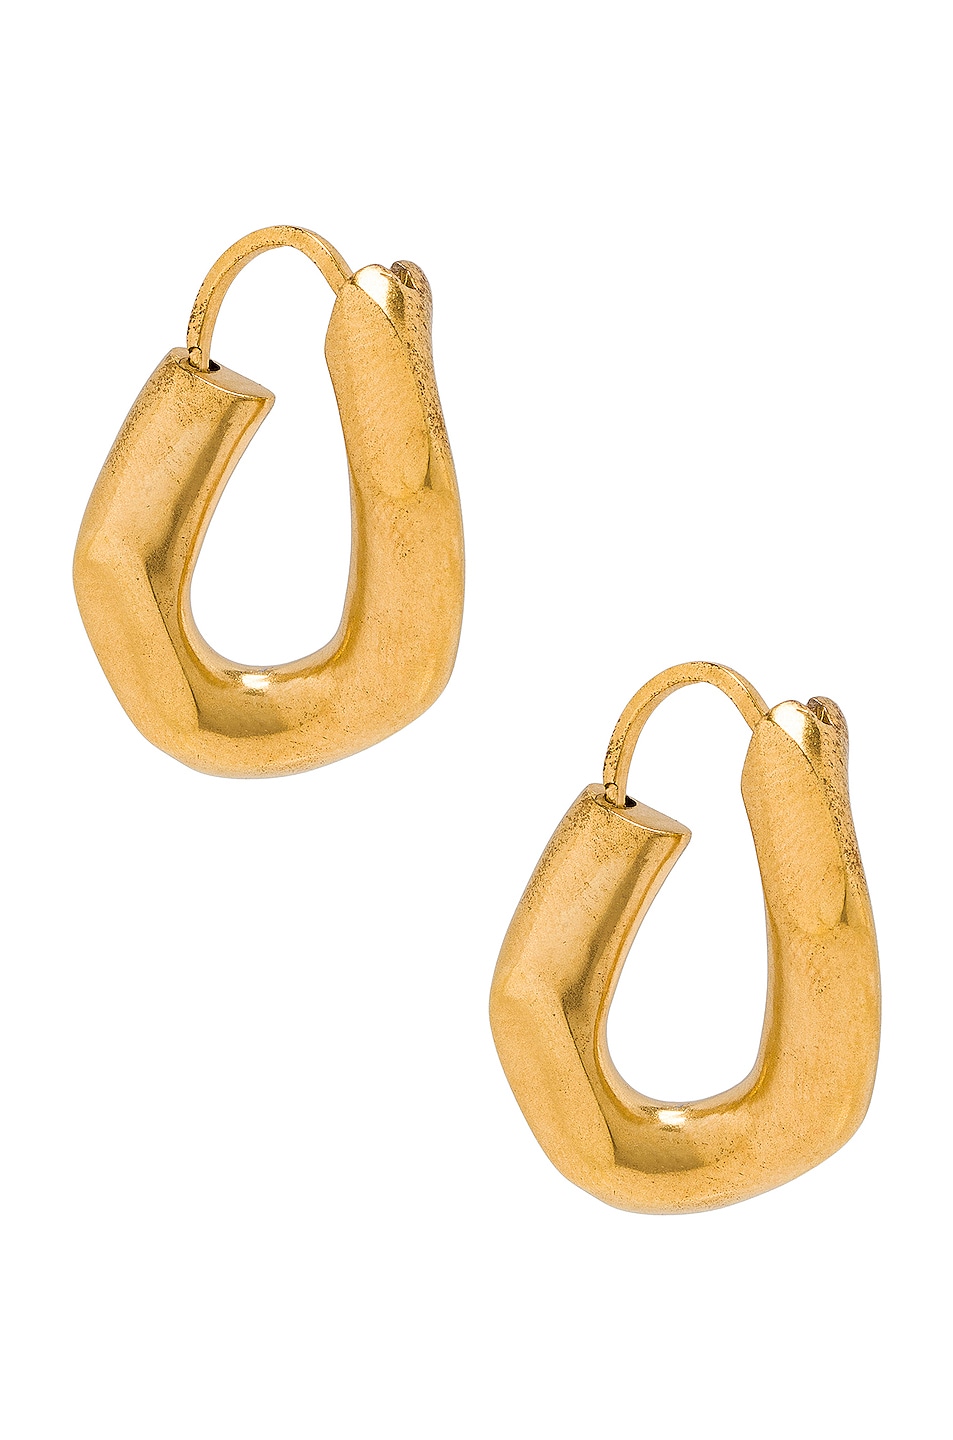 Image 1 of Maison Margiela Curved Earrings in Yellow Gold Plating